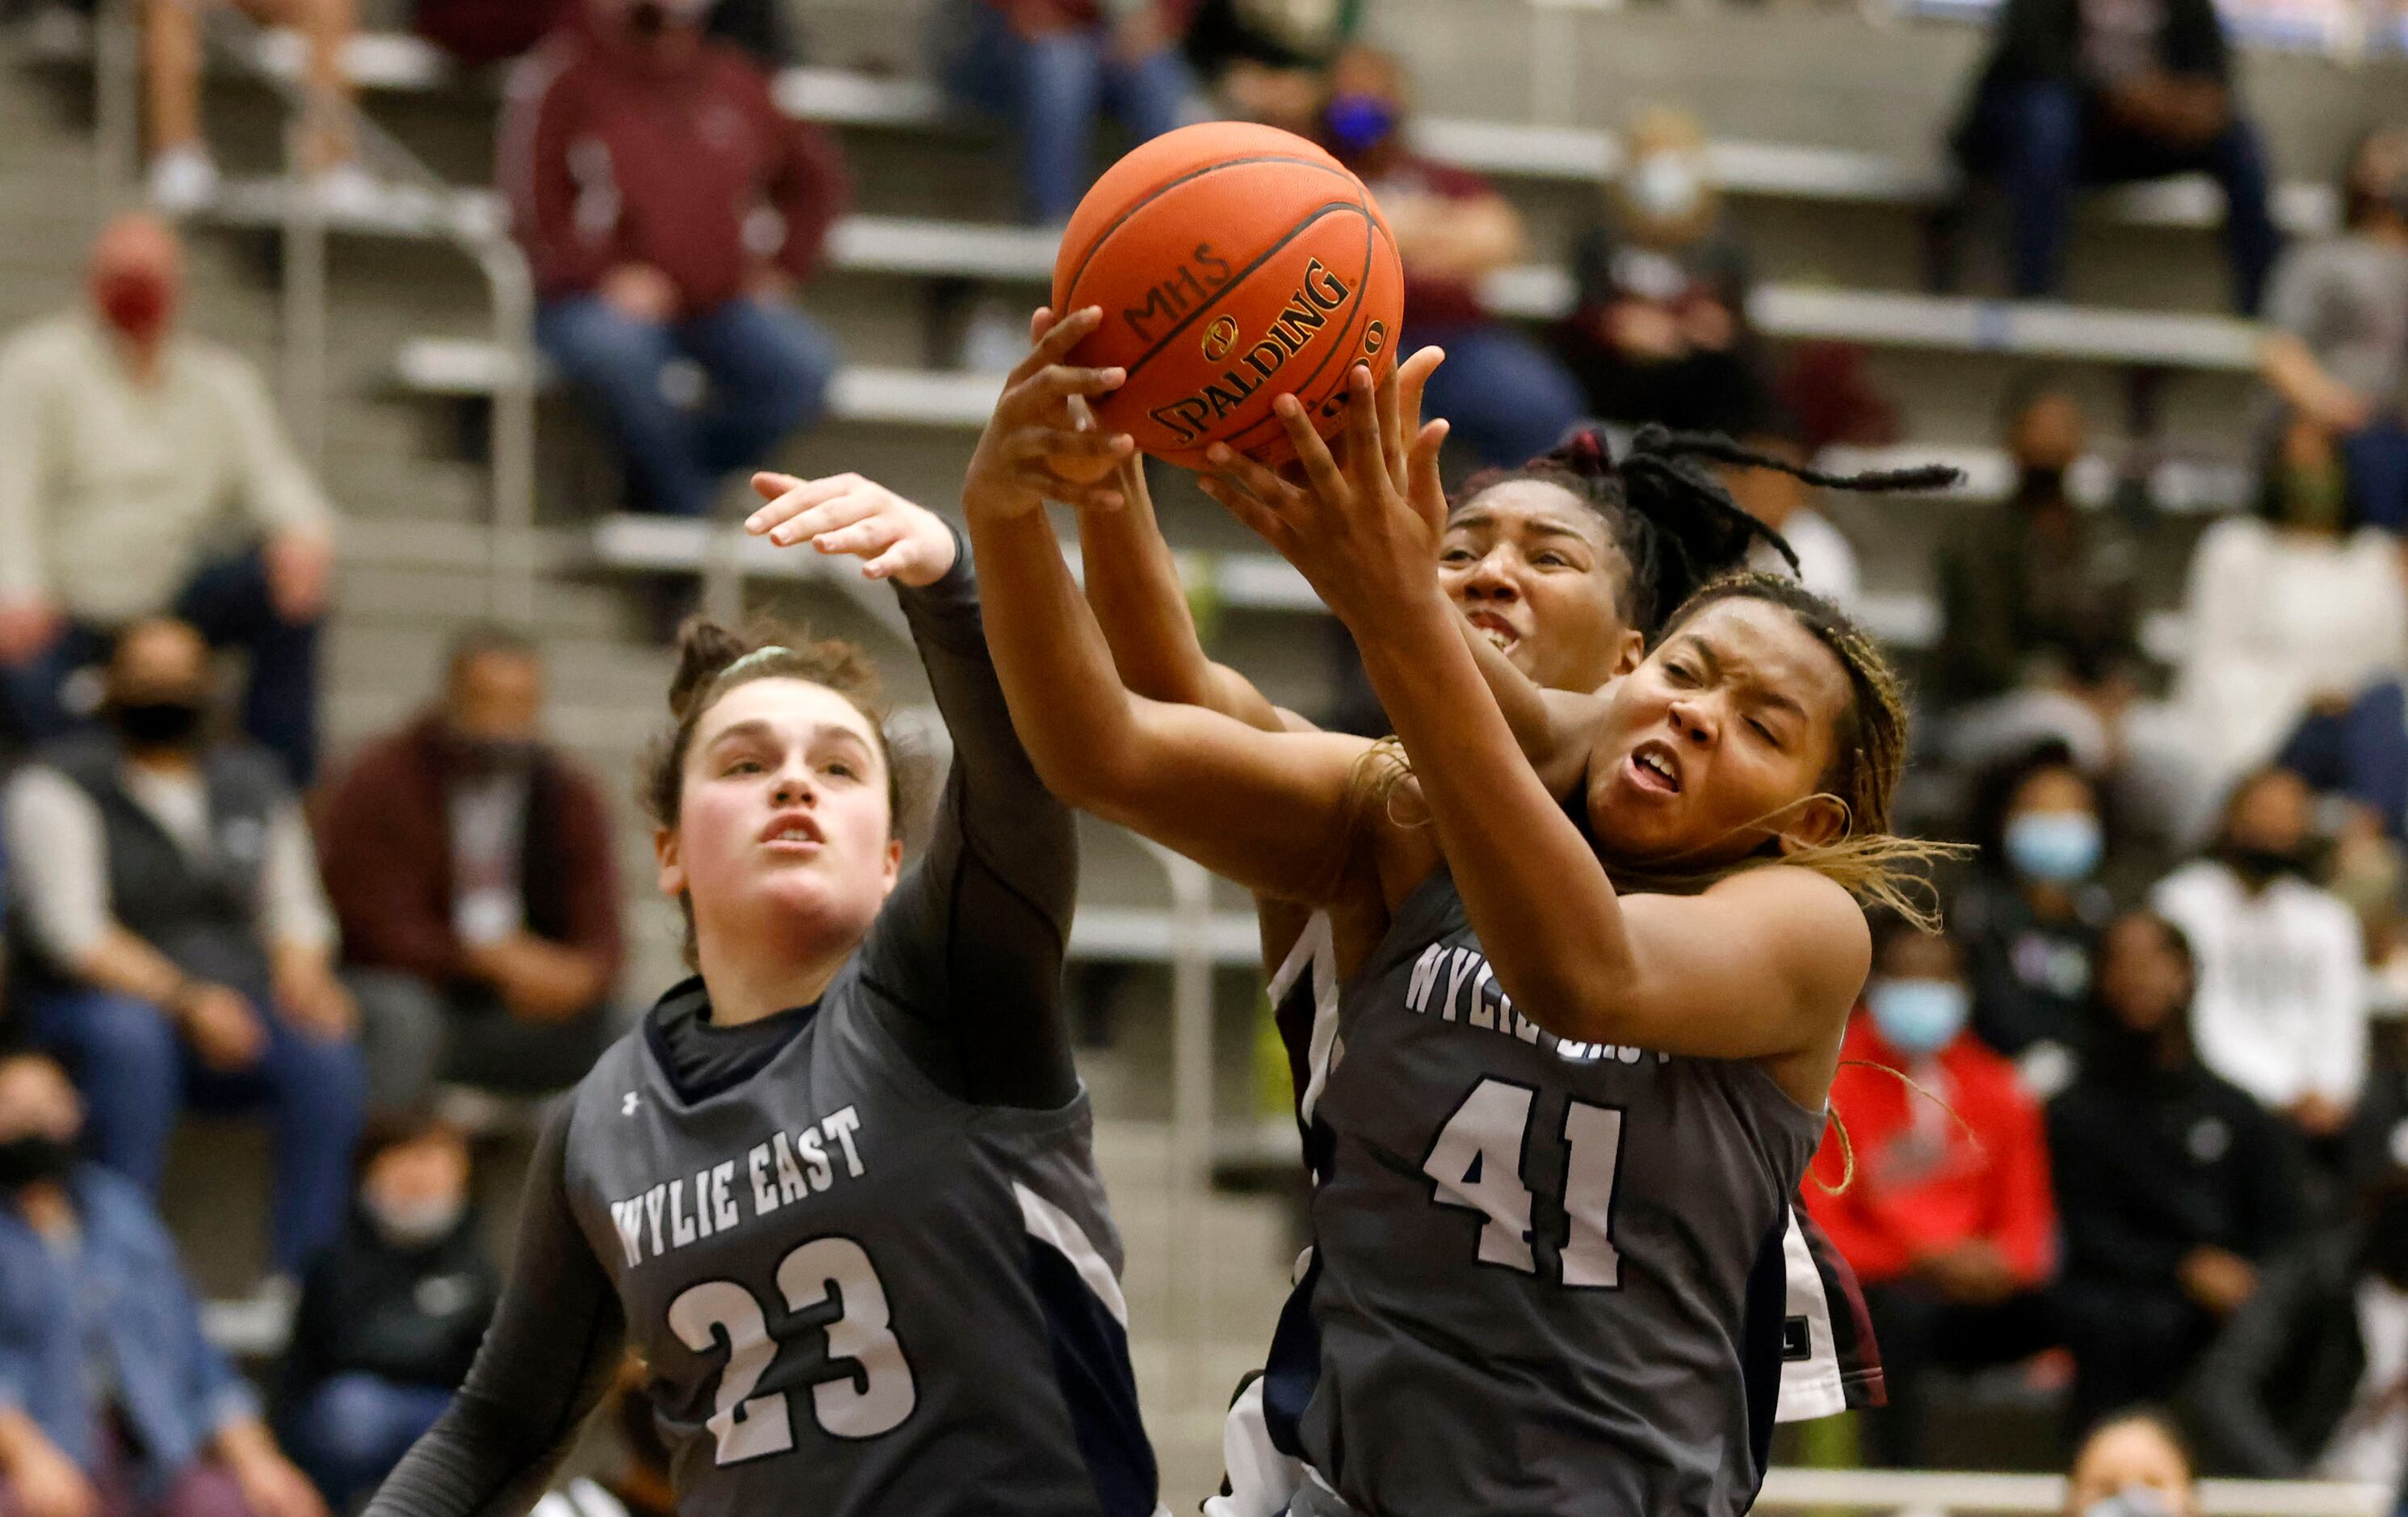 Wylie East’s Kiley Hicks (23) and Akasha Davis (41) go for a rebound in front of Red Oak’s...